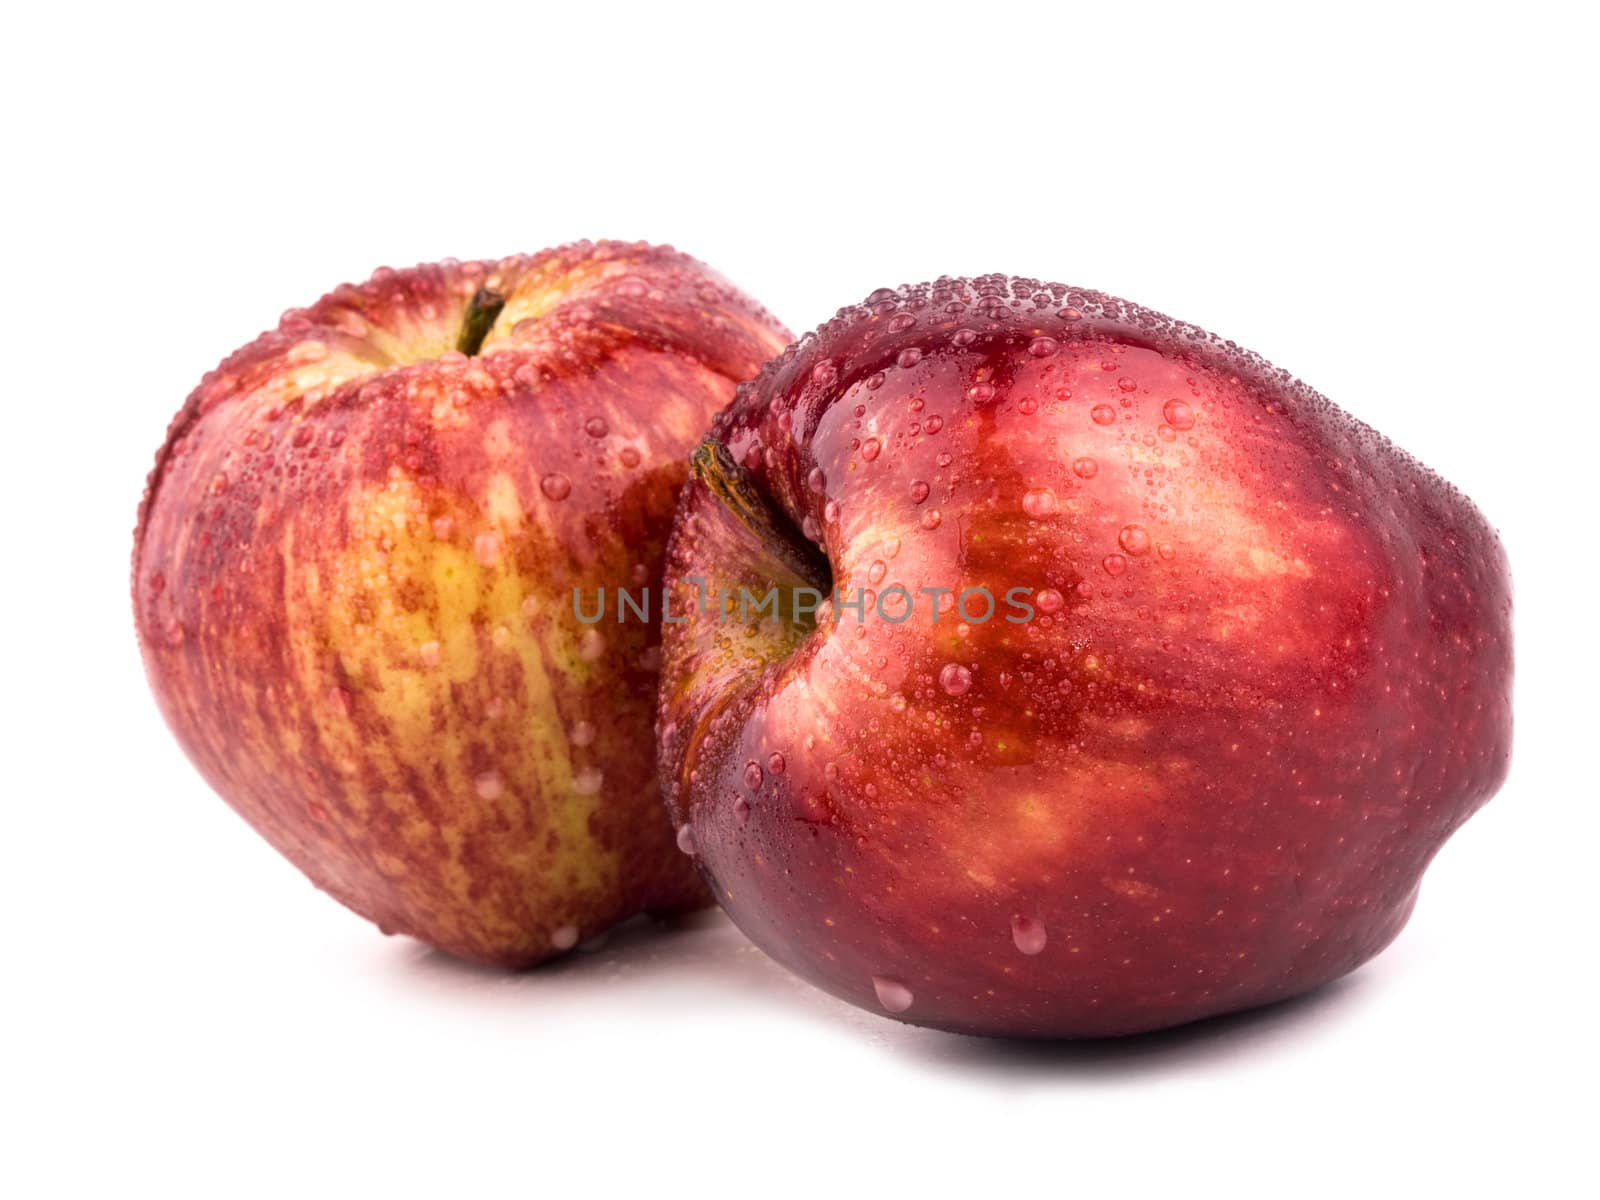 Two tasty red aplles on white background